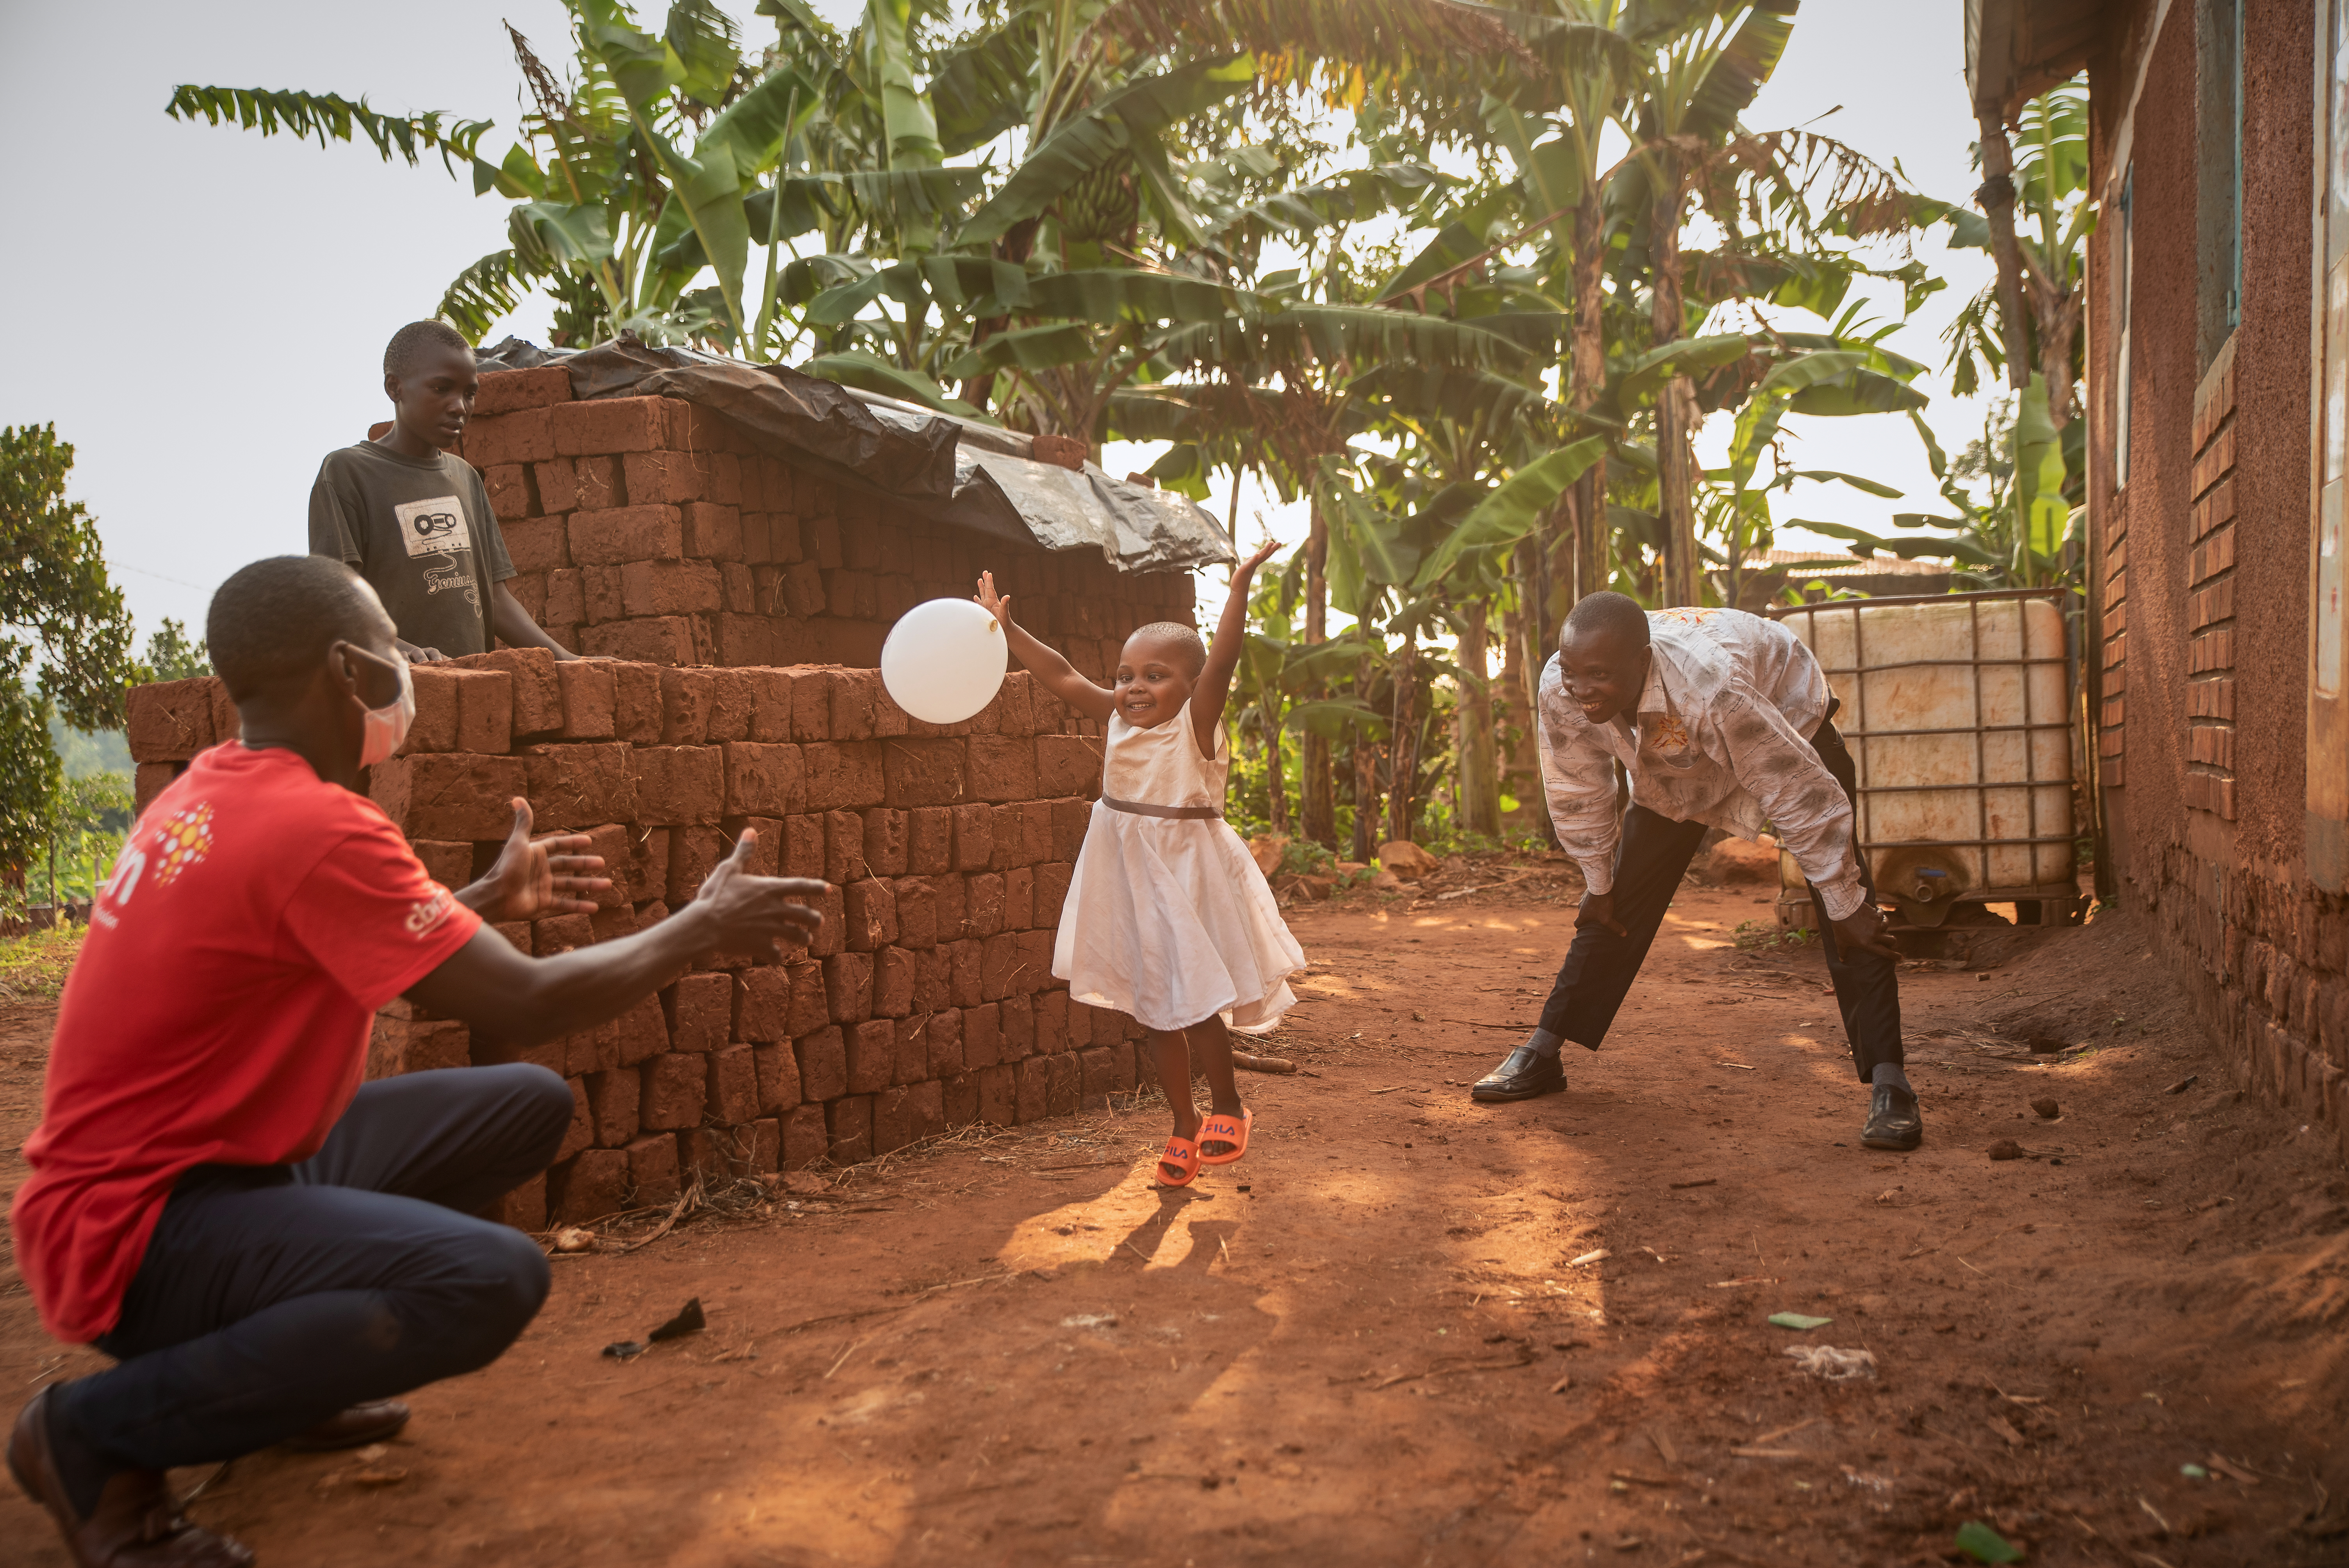 This photo shows a 3 year old girl wearing a white dress playing with a balloon with an African man wearing a CBM Tshirt.